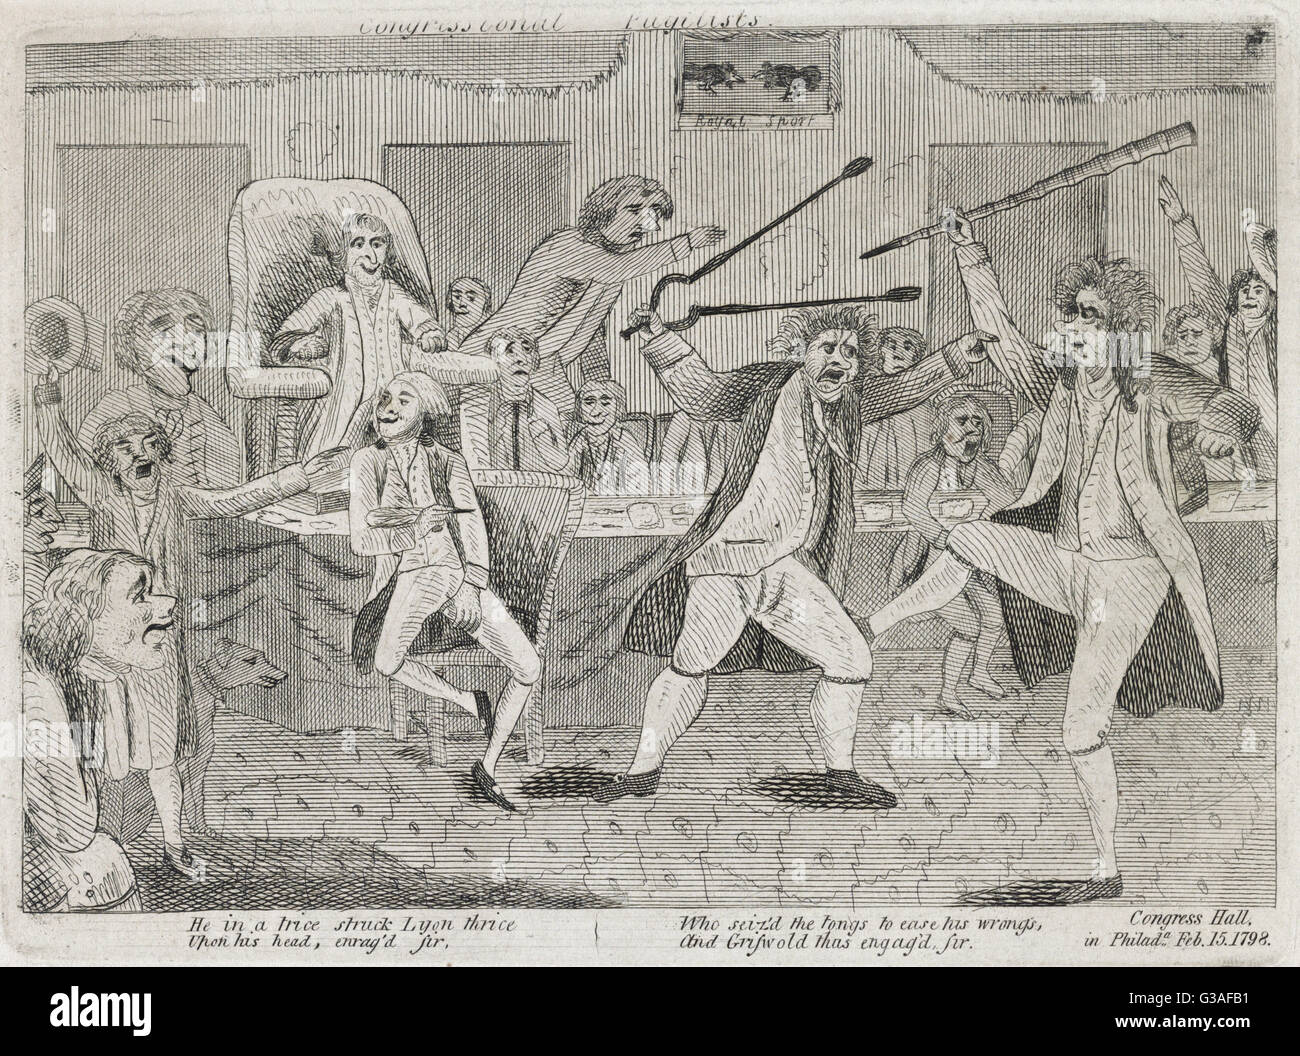 Congressional pugilists. A crude portrayal of a fight on the floor of Congress between Vermont Representative Matthew Lyon and Roger Griswold of Connecticut. The row was originally prompted by an insulting reference to Lyon on Griswold's part. The interio Stock Photo